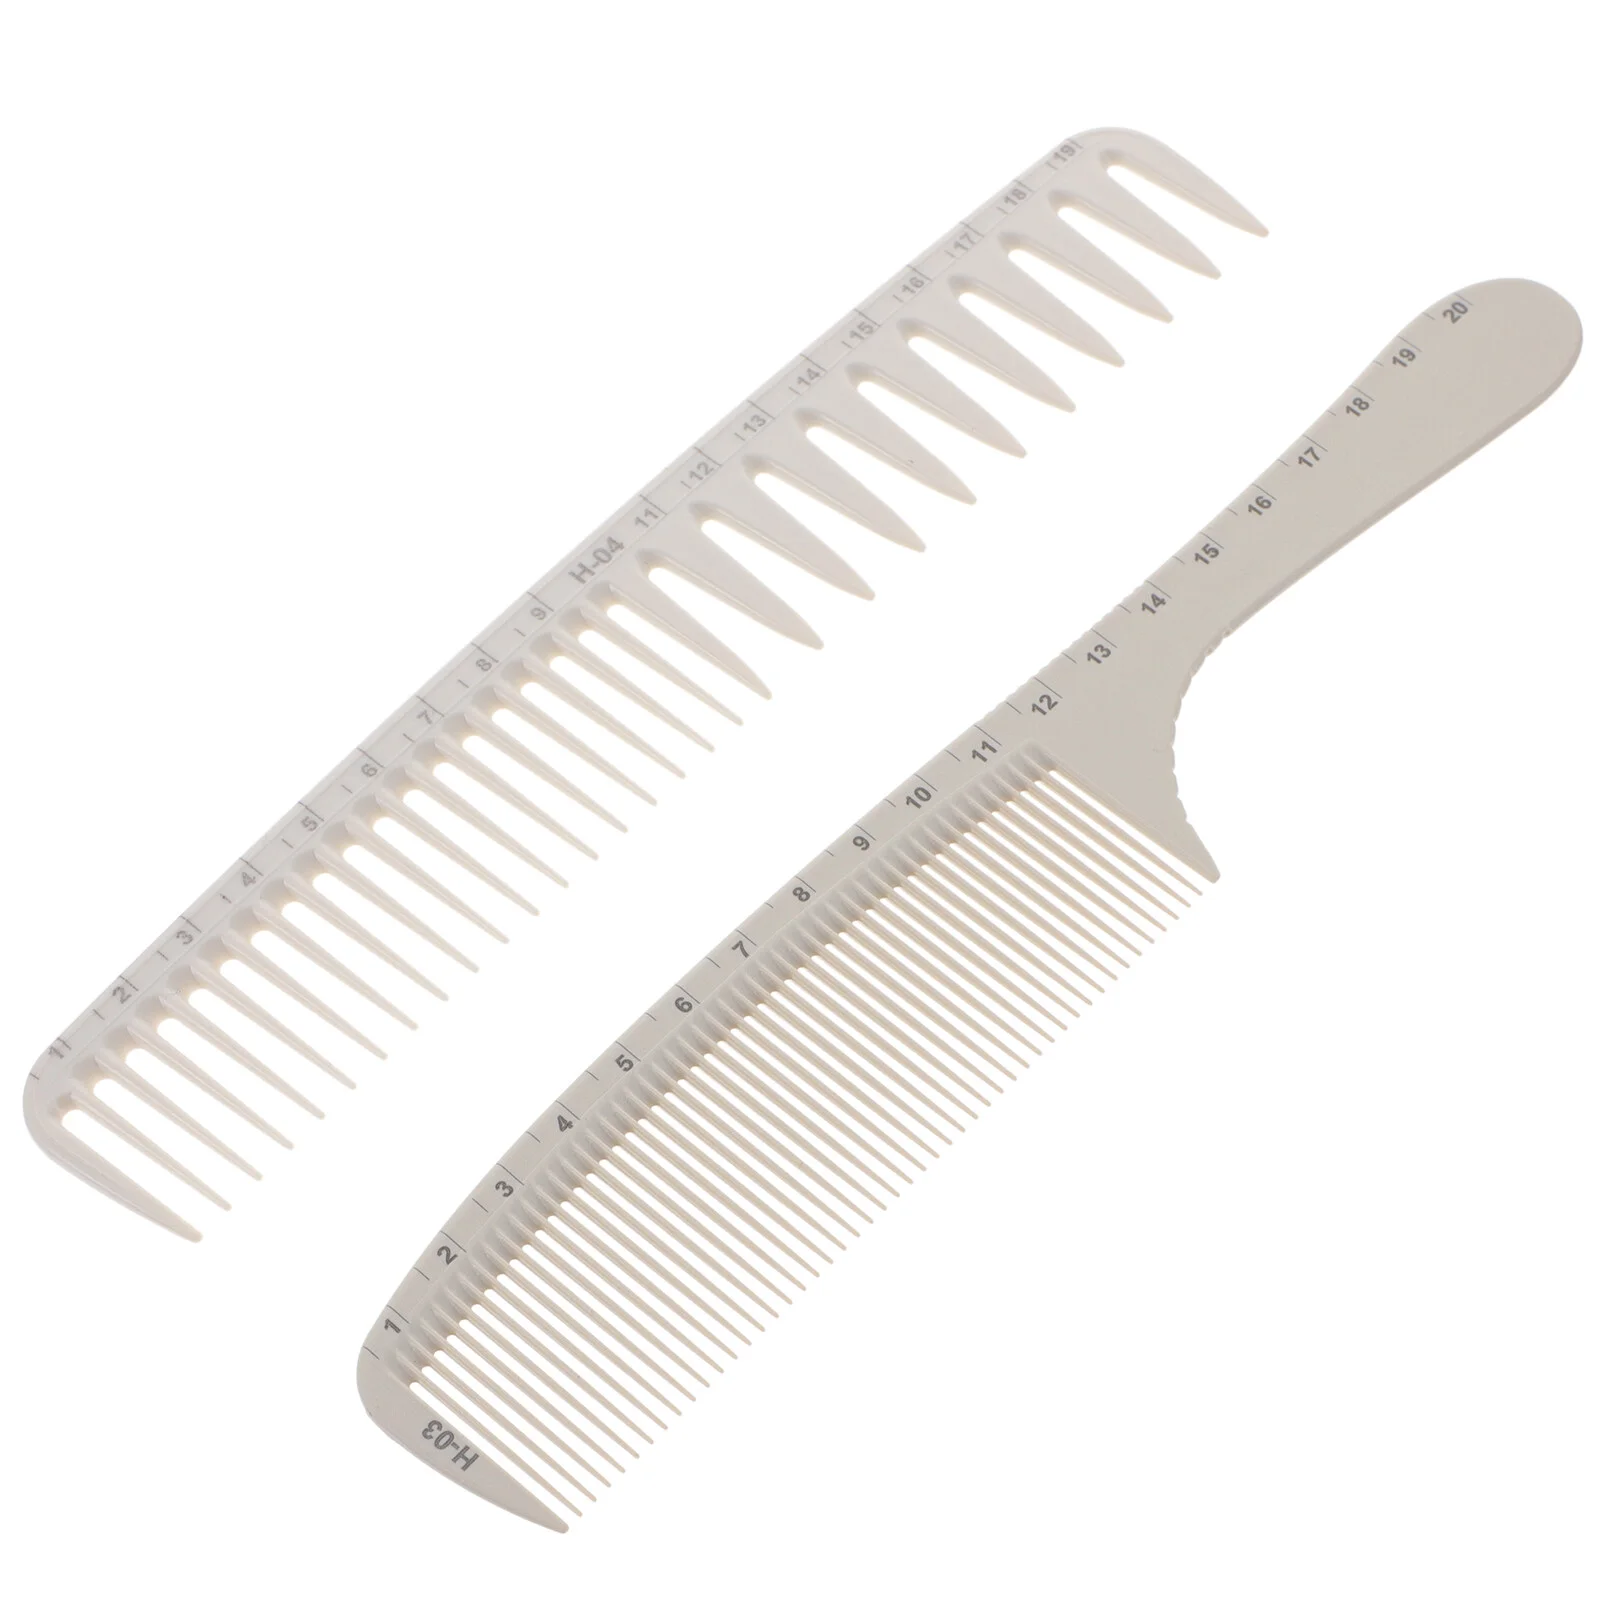 

2 Pcs Graduated Hair Comb Cutting Combs In Hair Styling Comb Bulk Professional Abs Barber Parting Braiding Travel Styling